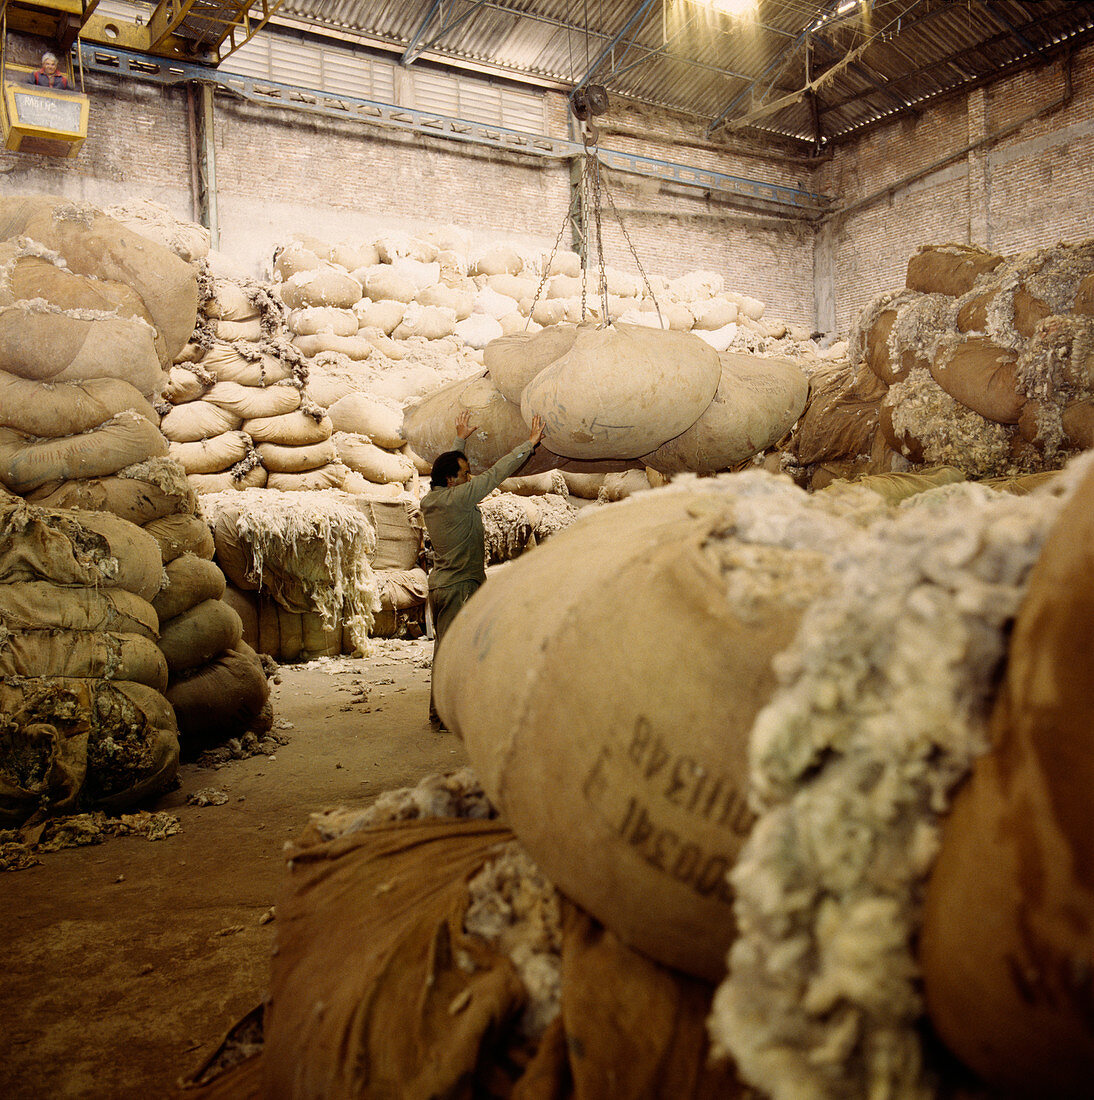 Fleece storage at a tannery